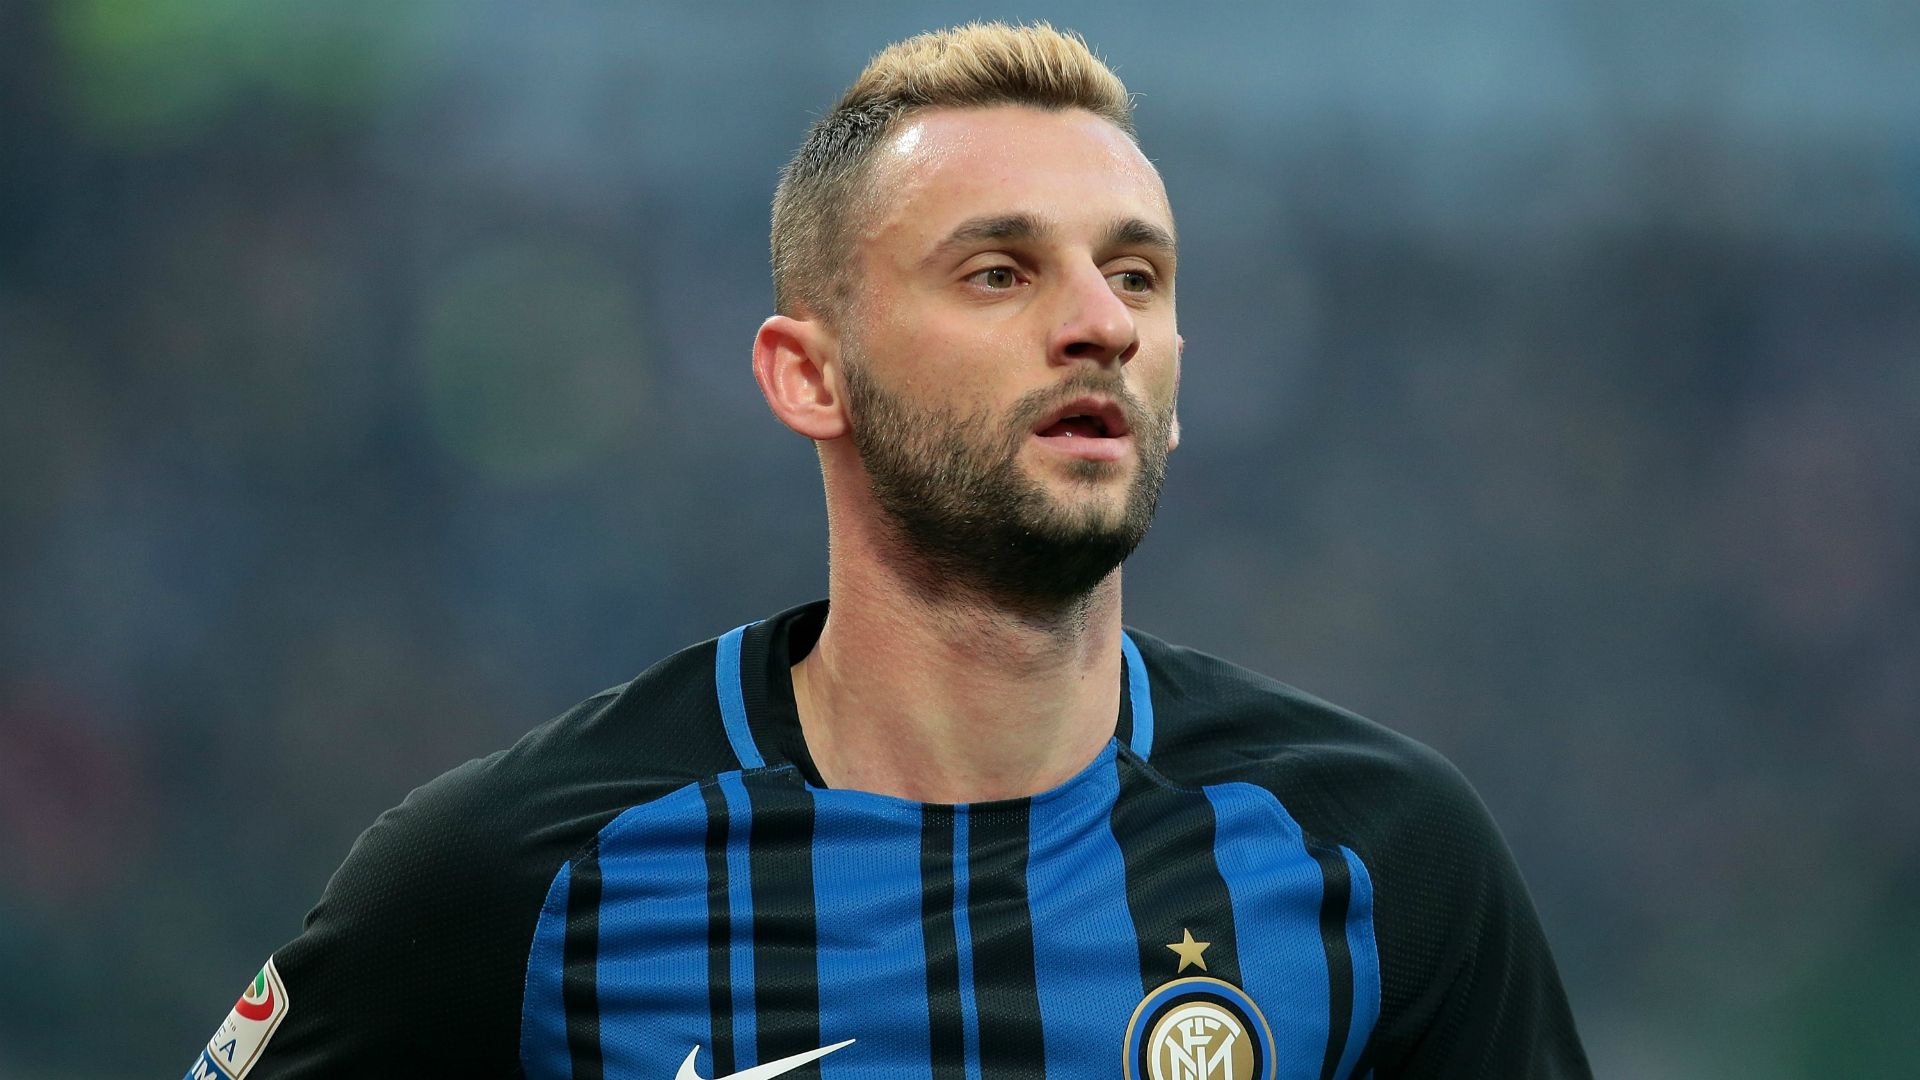 Premier League transfer news: Agent hints at English interest in Brozovic: They could pay his €50m release clause!